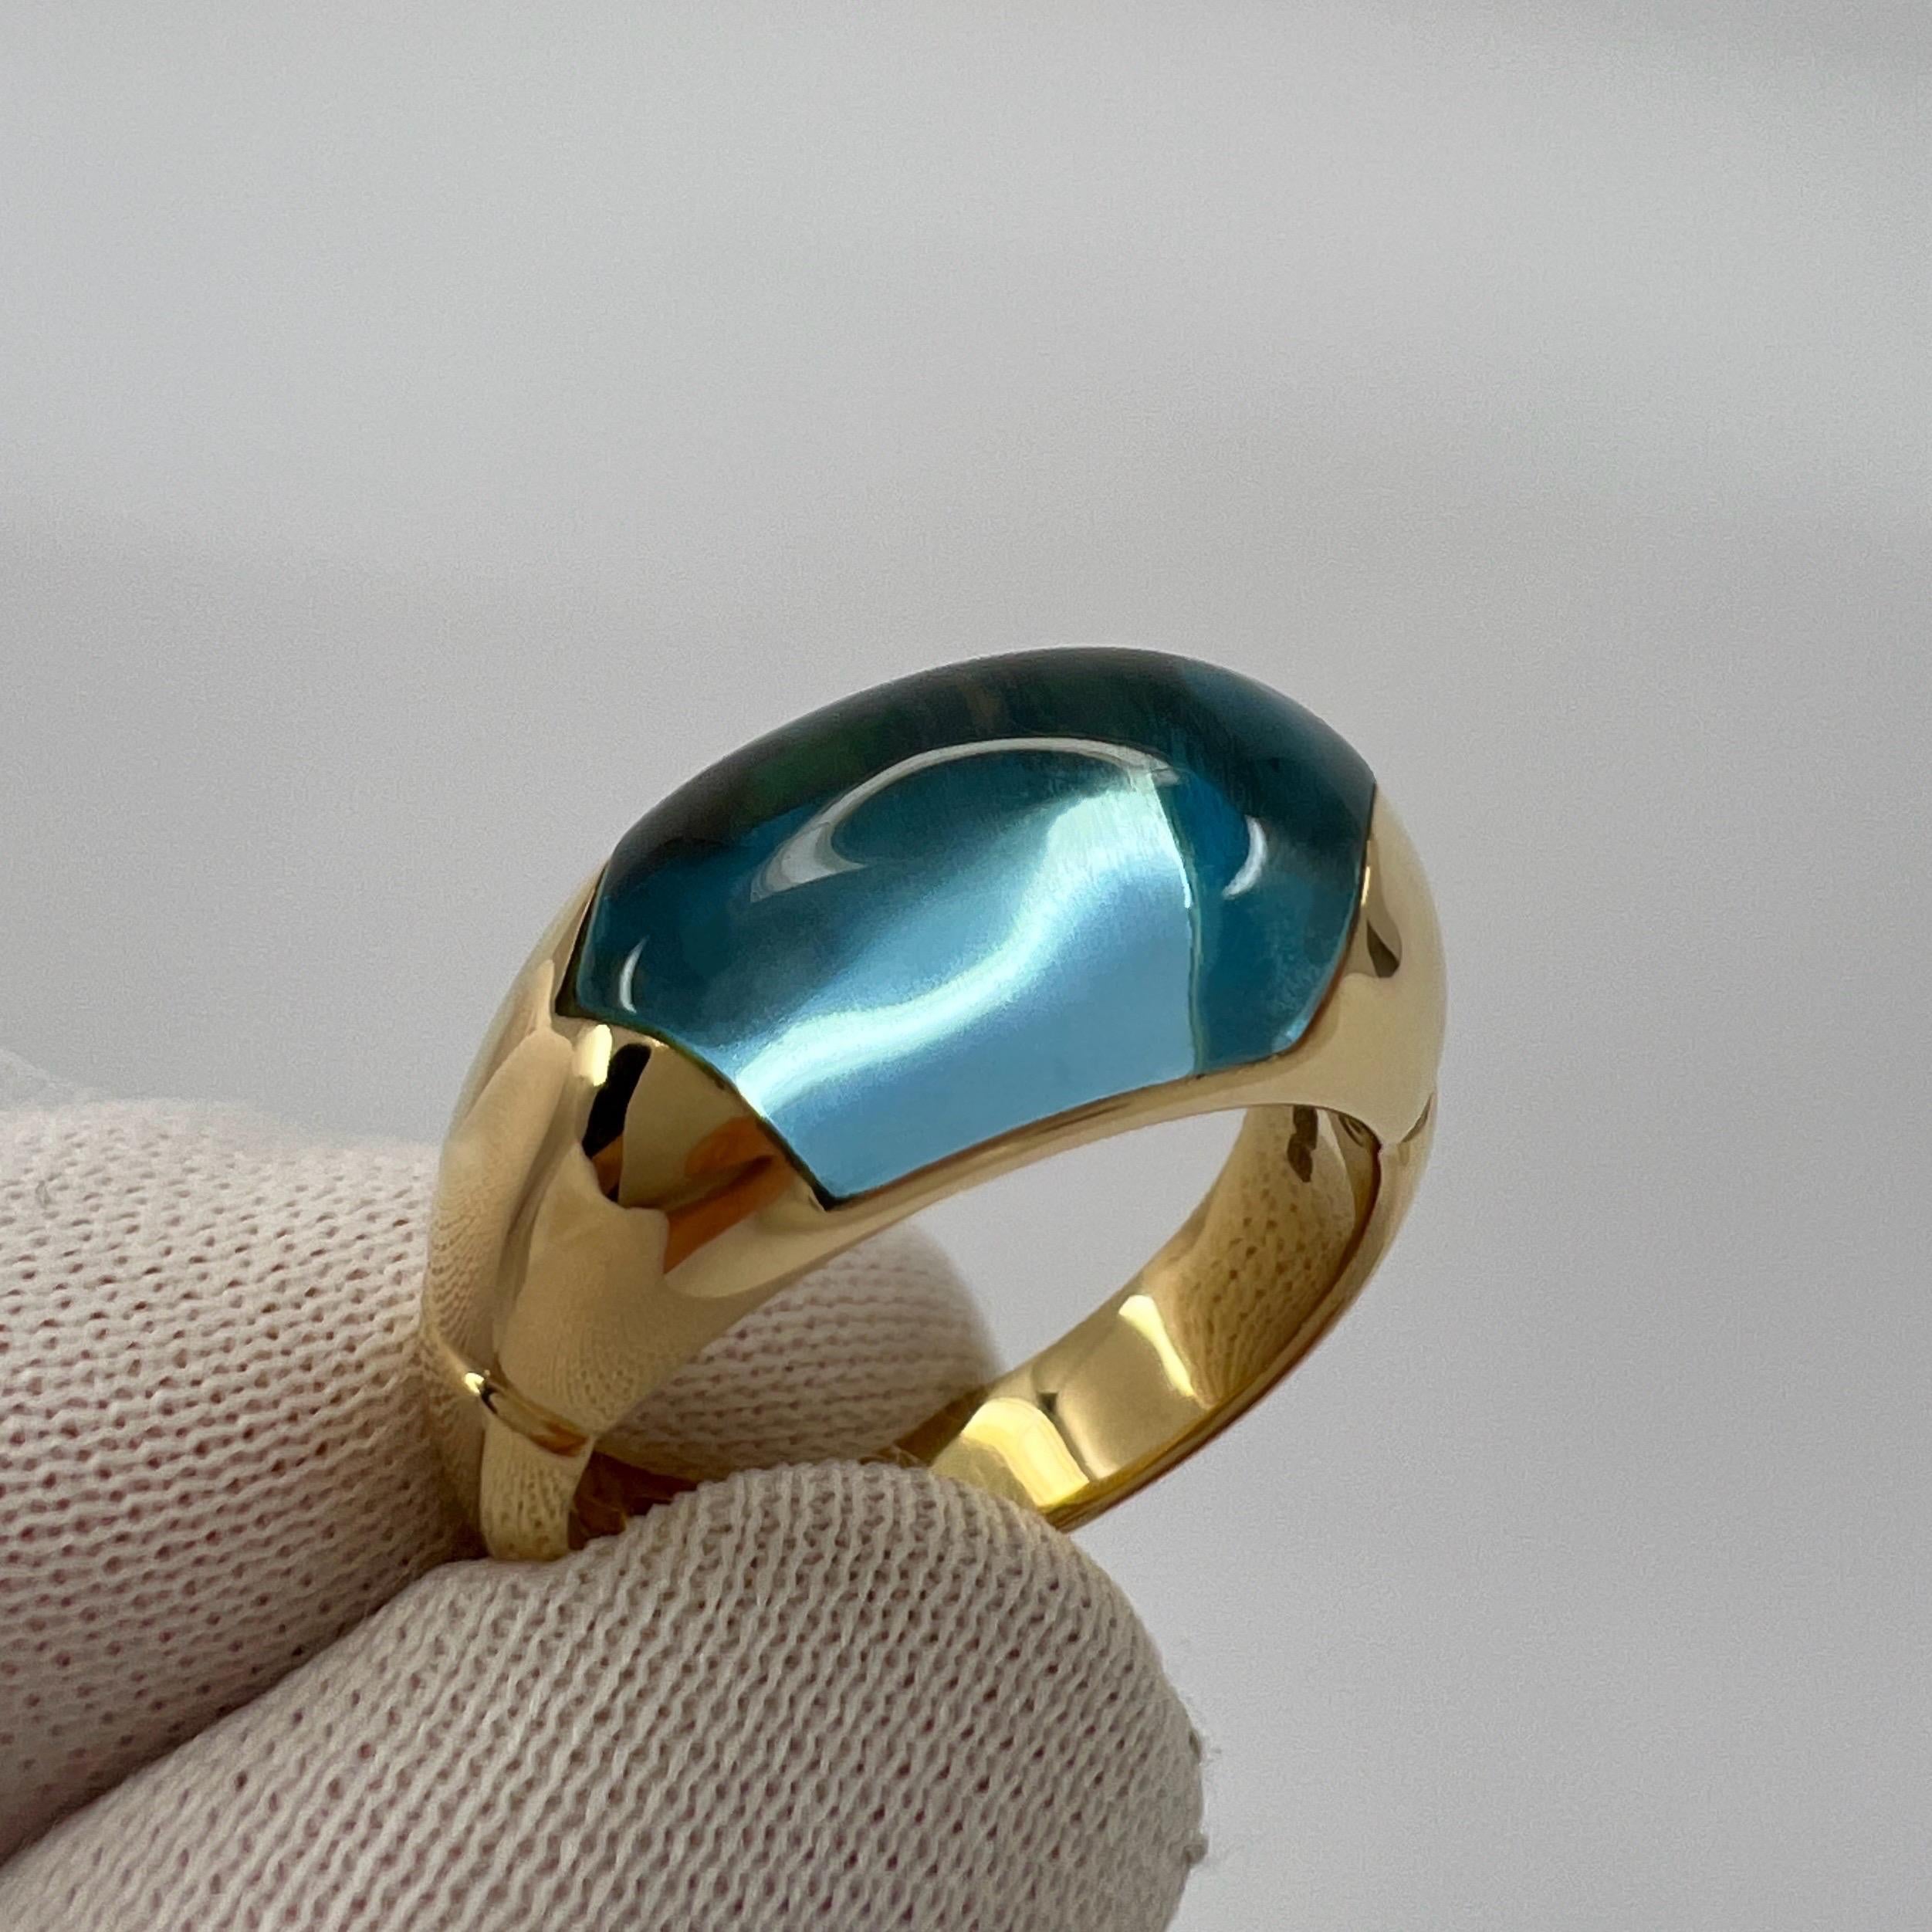 Rare Vintage Bvlgari Certica 18k Yellow Gold Blue Topaz Dome Ring with Box 6